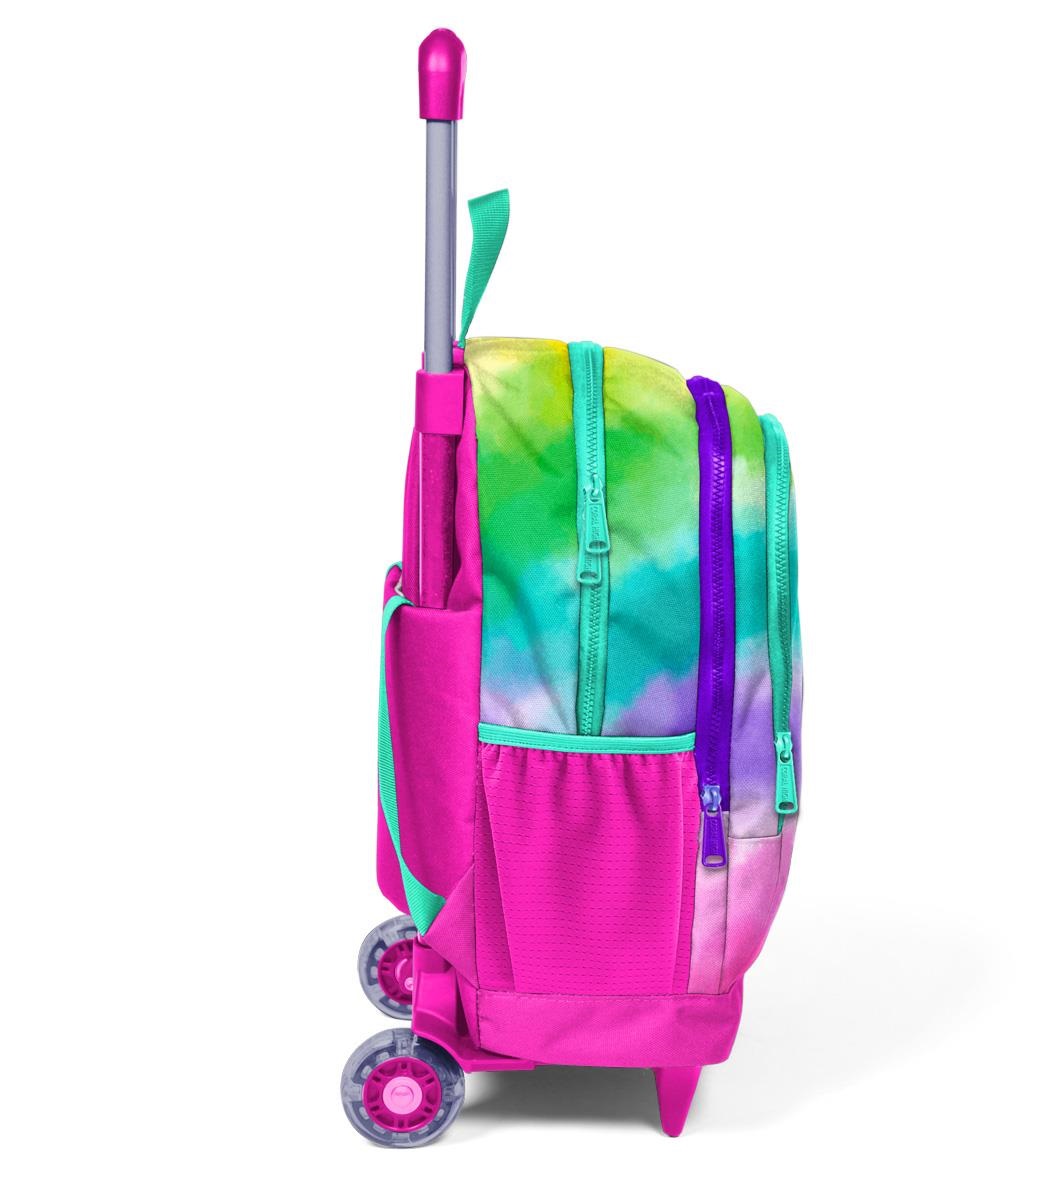 Coral High Kids Three Compartment Squeegee School Backpack - Colorful Tie-Dye Patterned